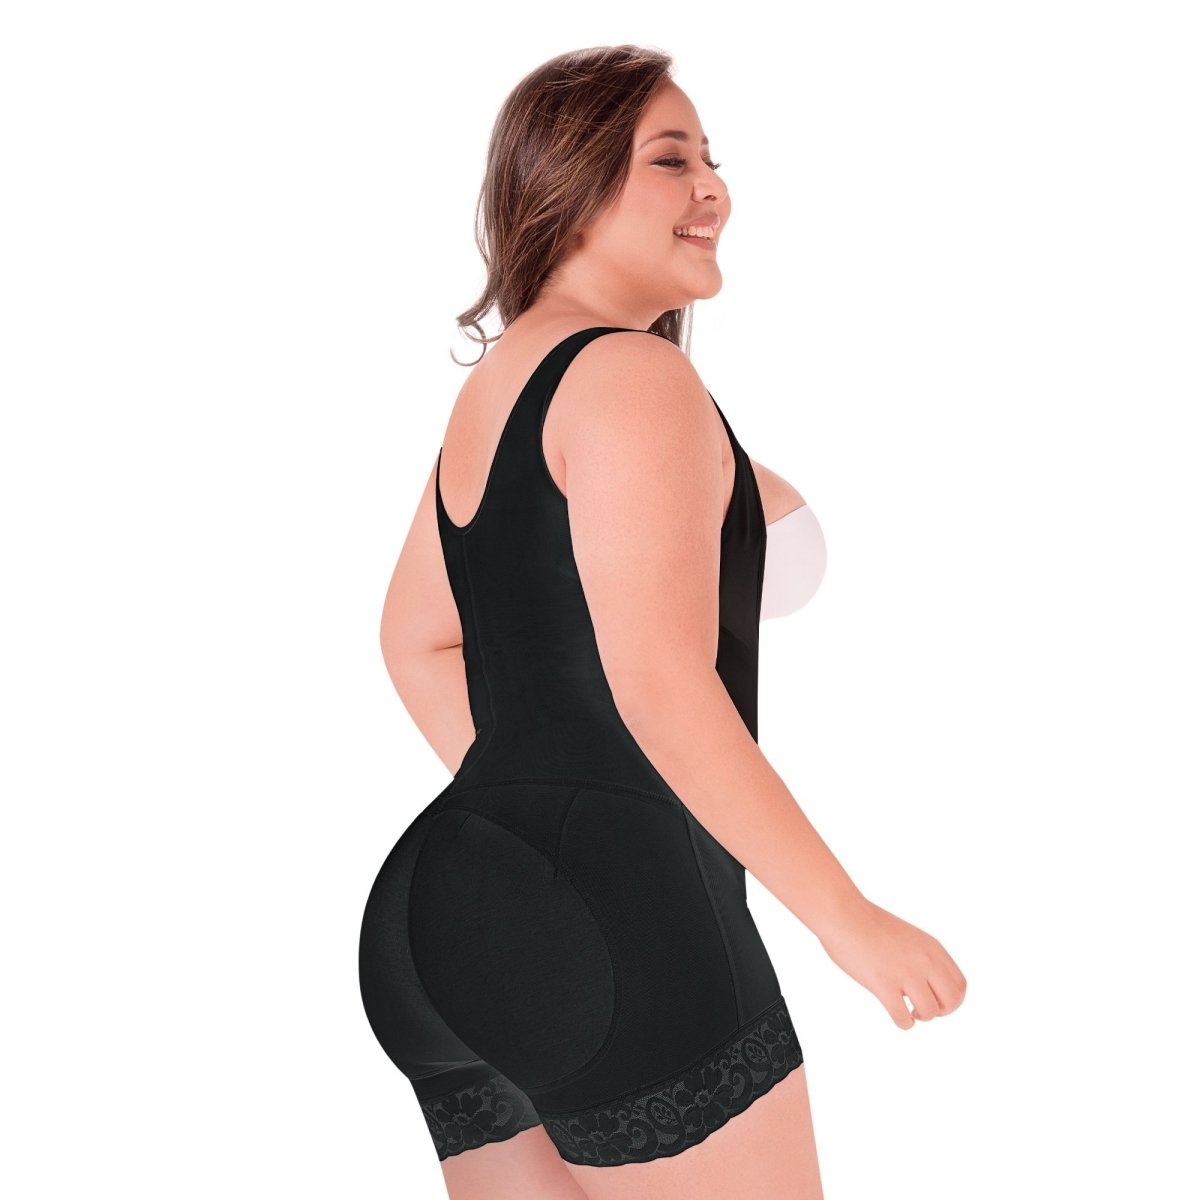 MariaE 9831 Body Shaper for Daily Use / Open Bust with Front Zipper - Colombian Body Shaper